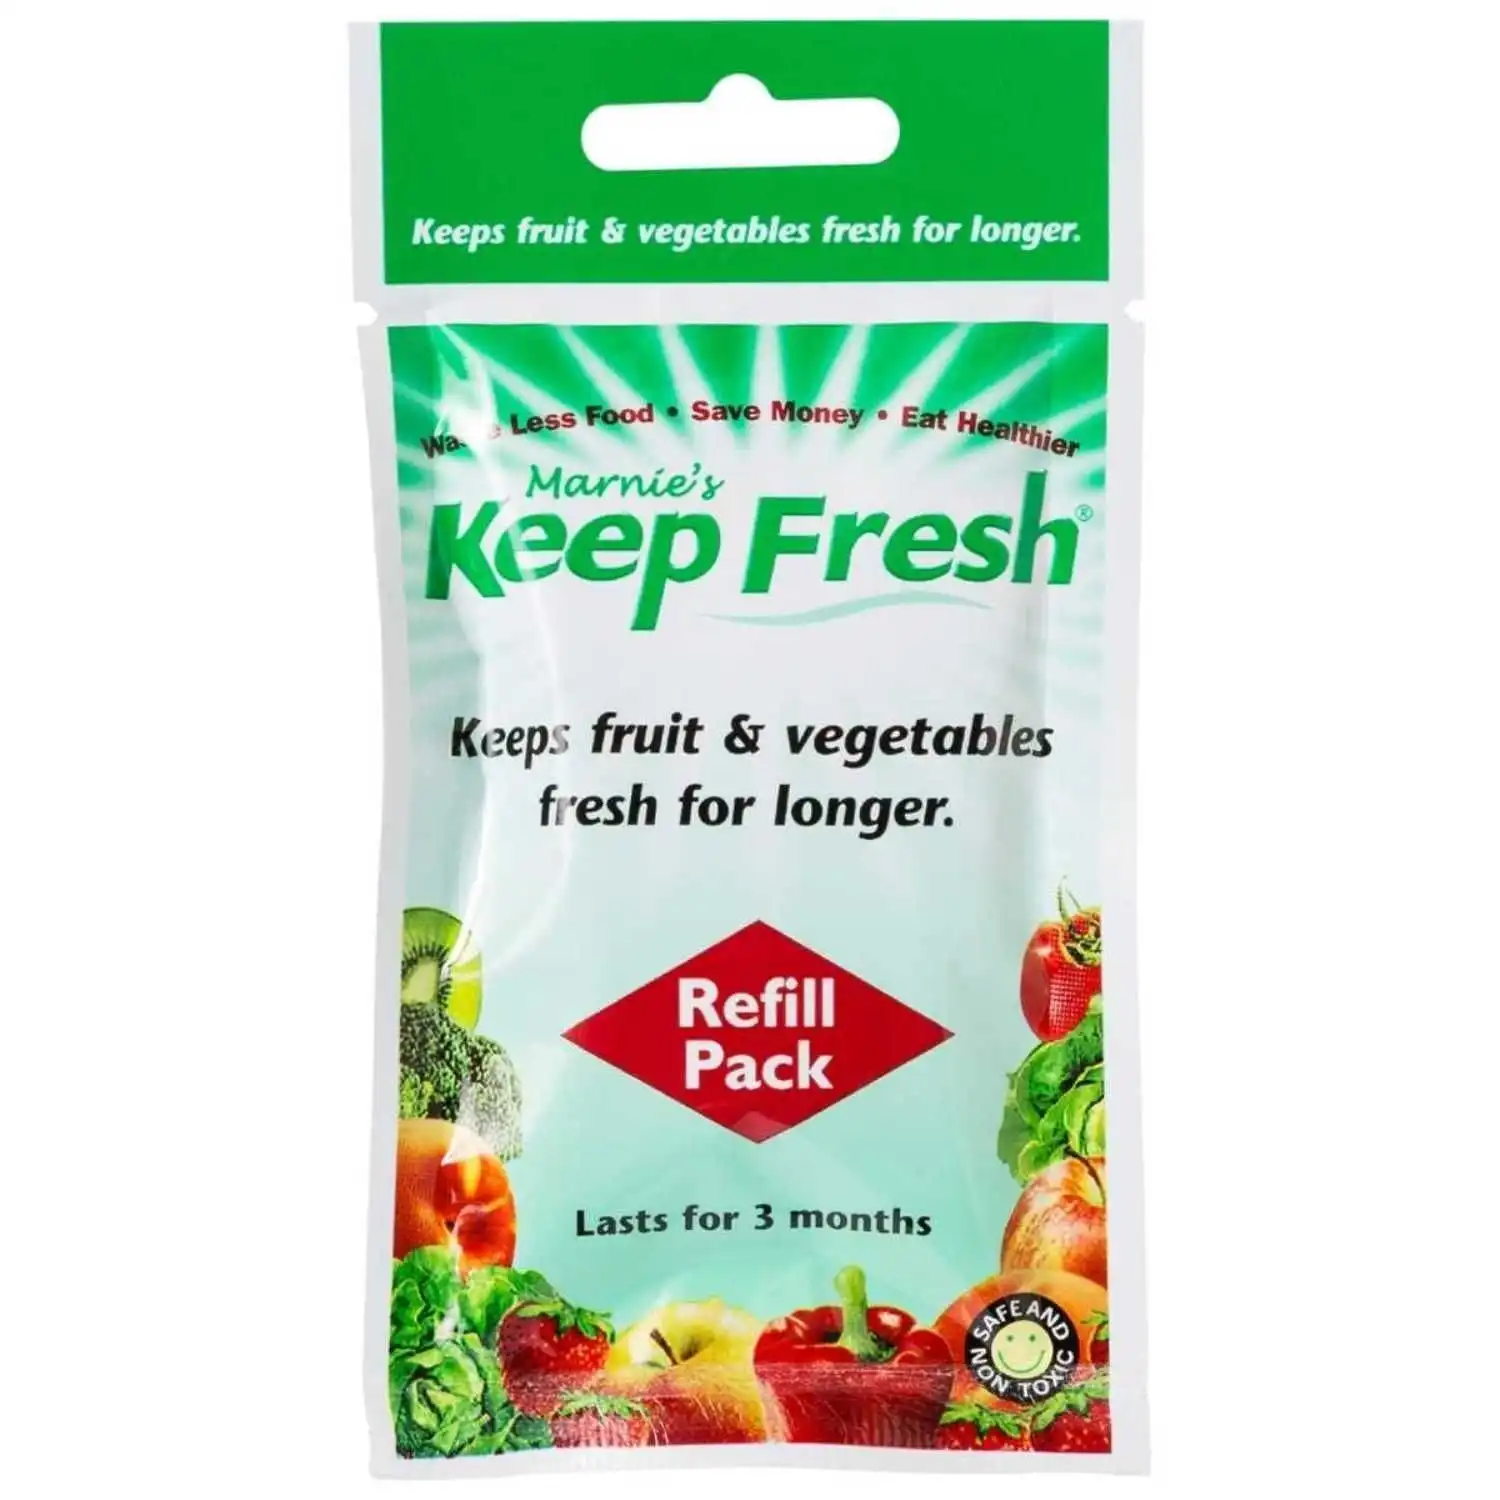 Marnie's Keep Fresh Fruit And Vegetable Saver Refill Pack